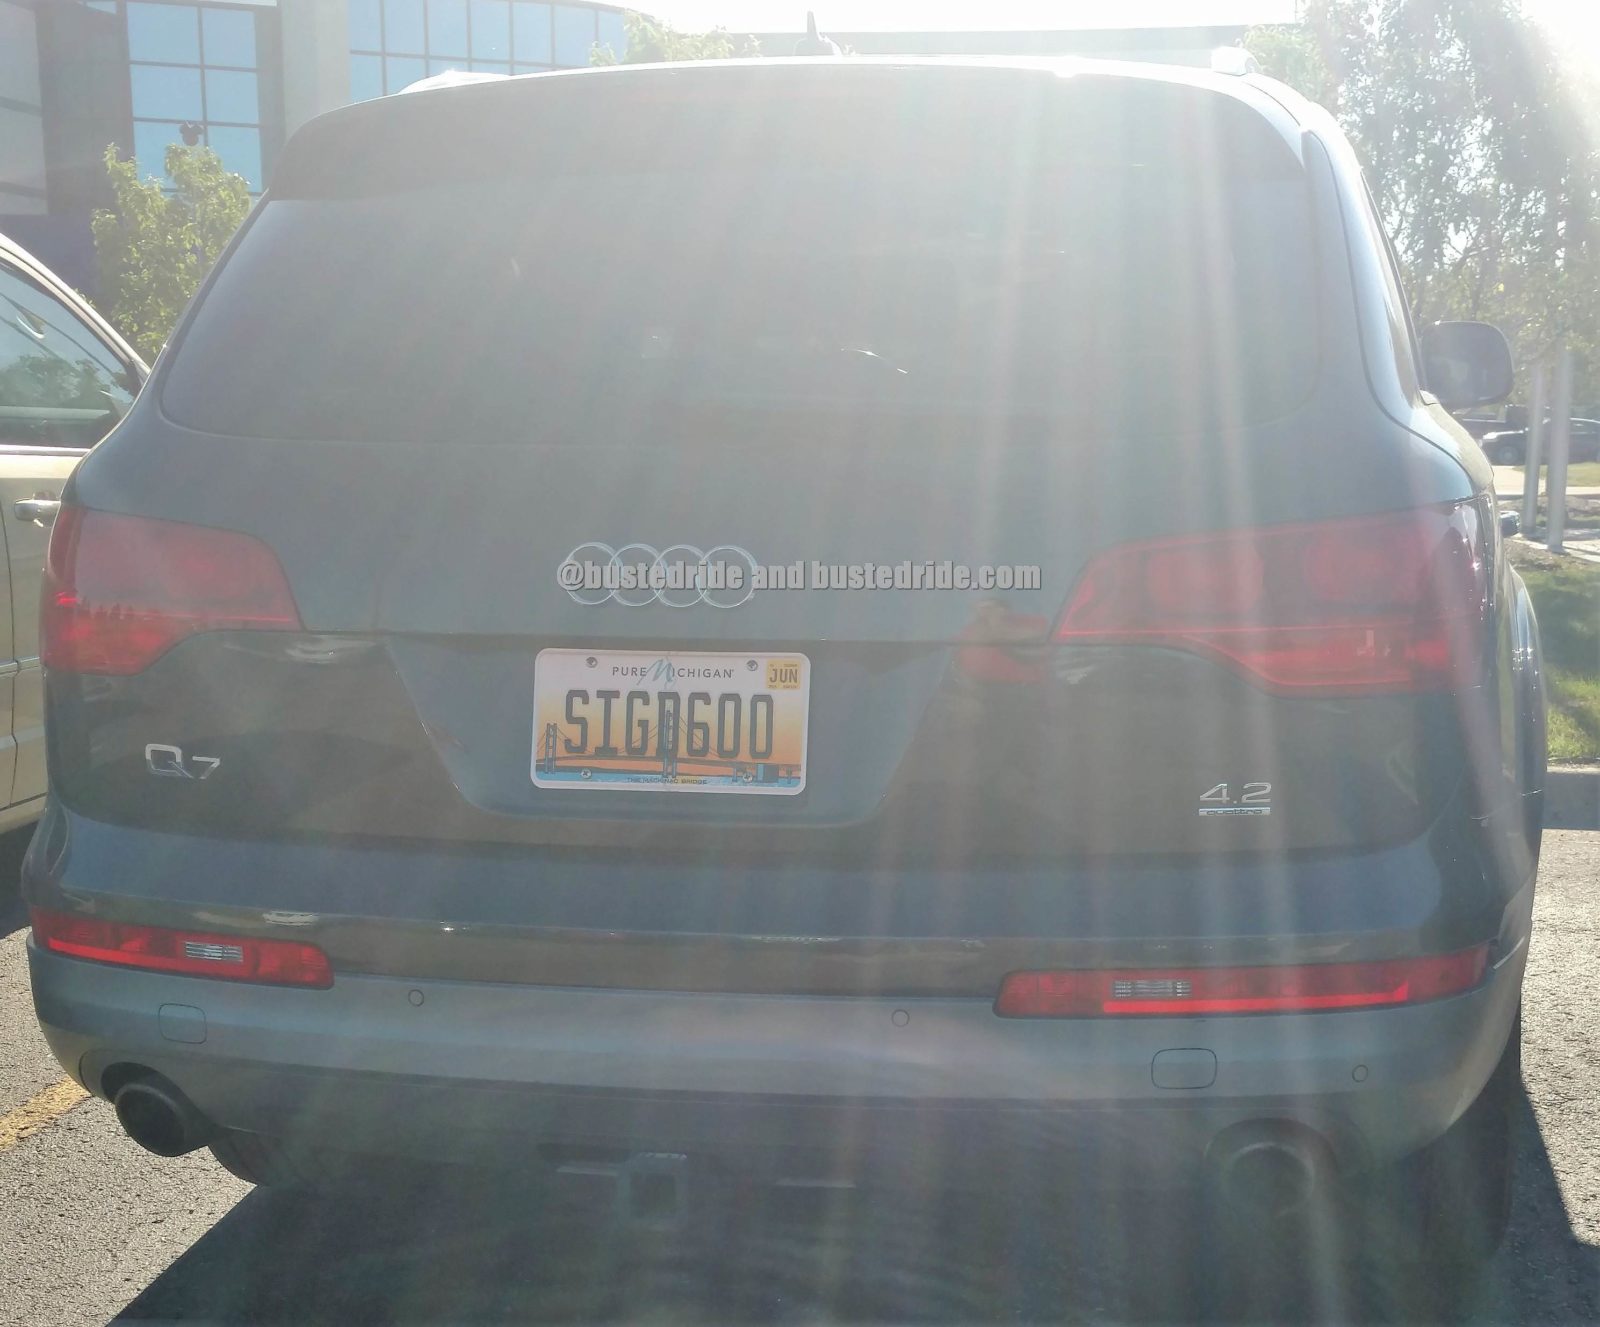 SIGD600 - Vanity License Plate by Busted Ride